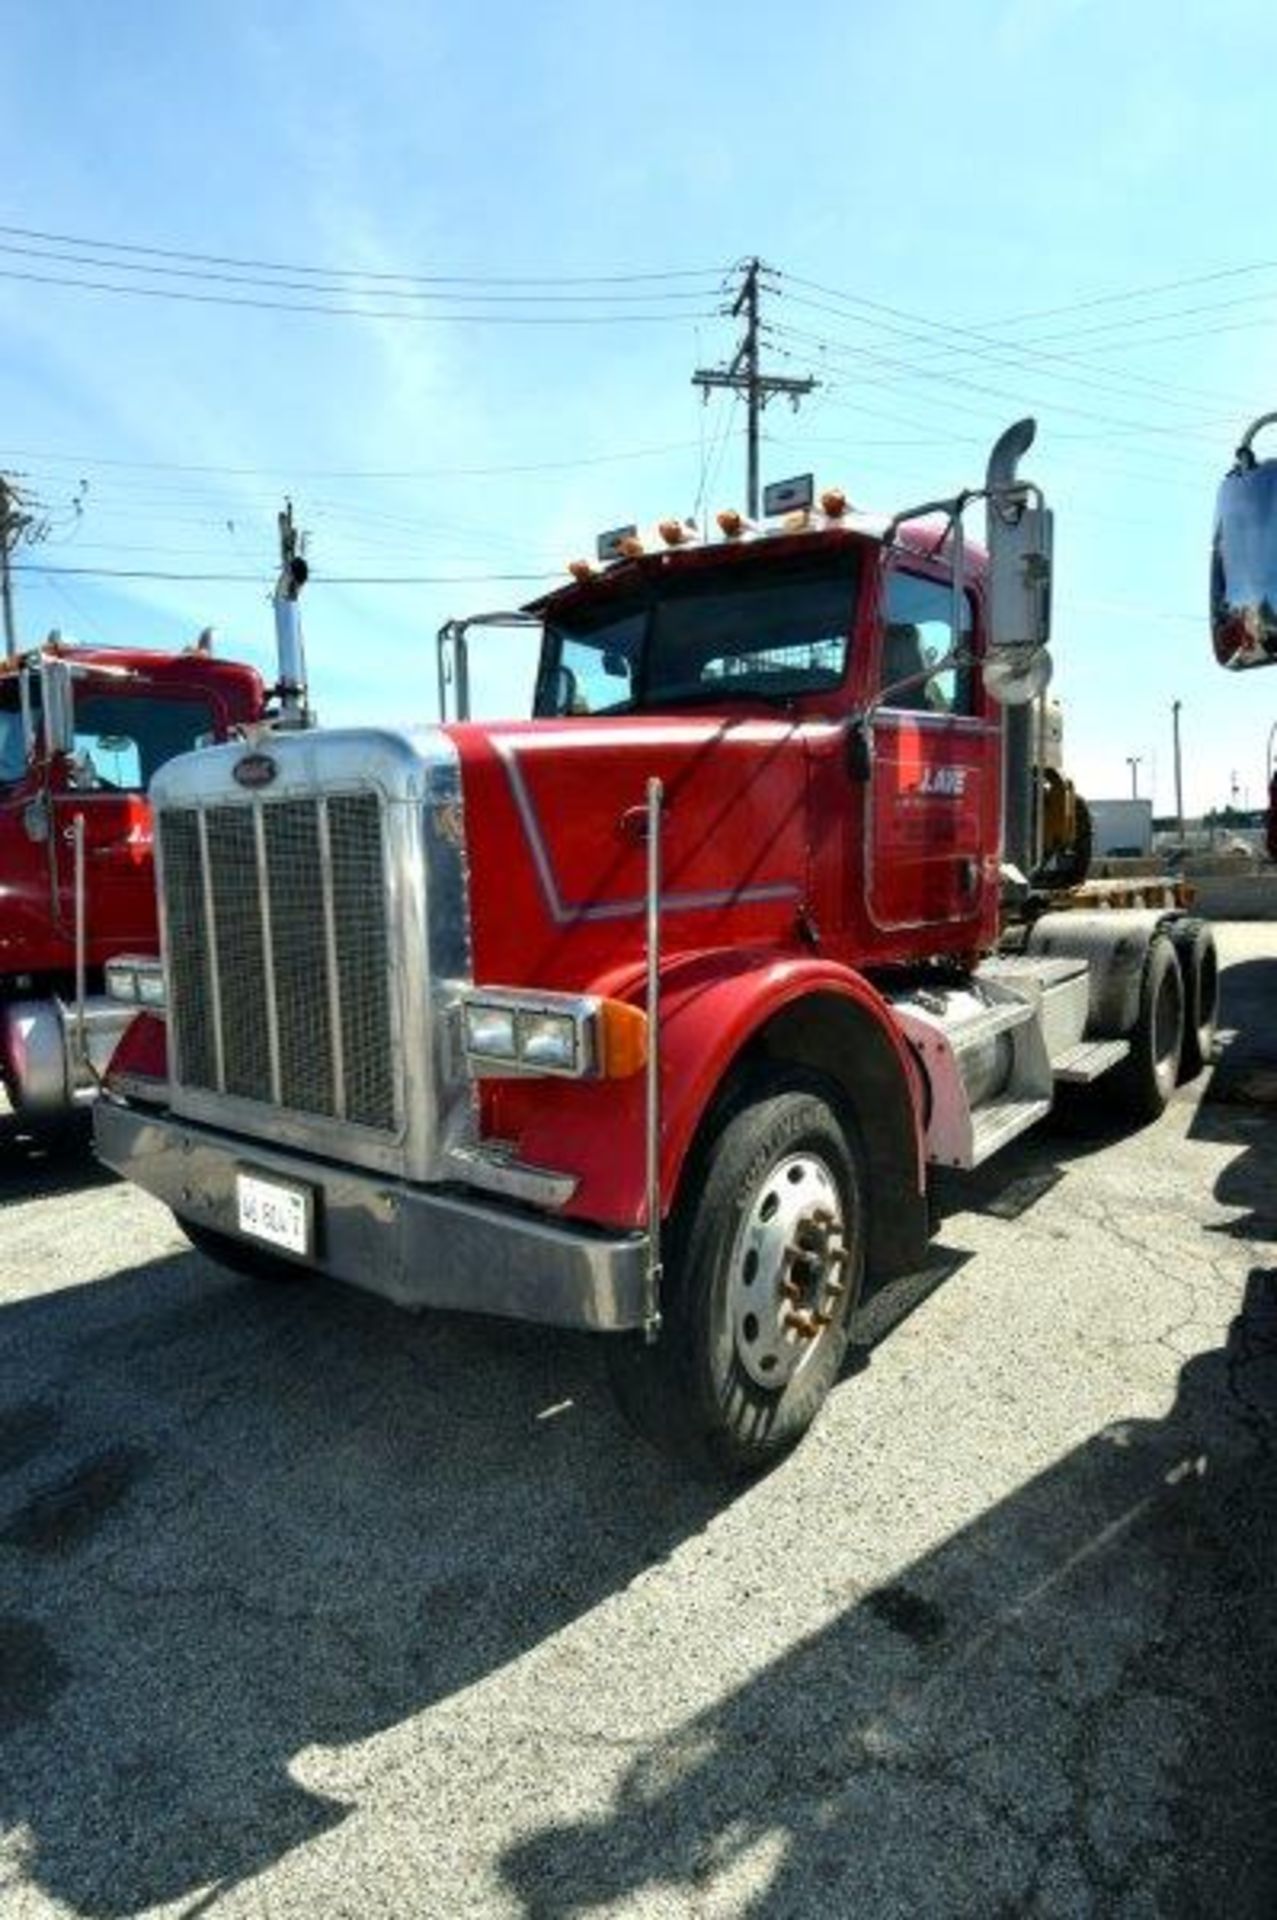 Peterbilt Tractor, Trail King Lowboy, Caterpillar 583H Pipelayer, Trailer with Auxiliary Equipment. - Image 25 of 68